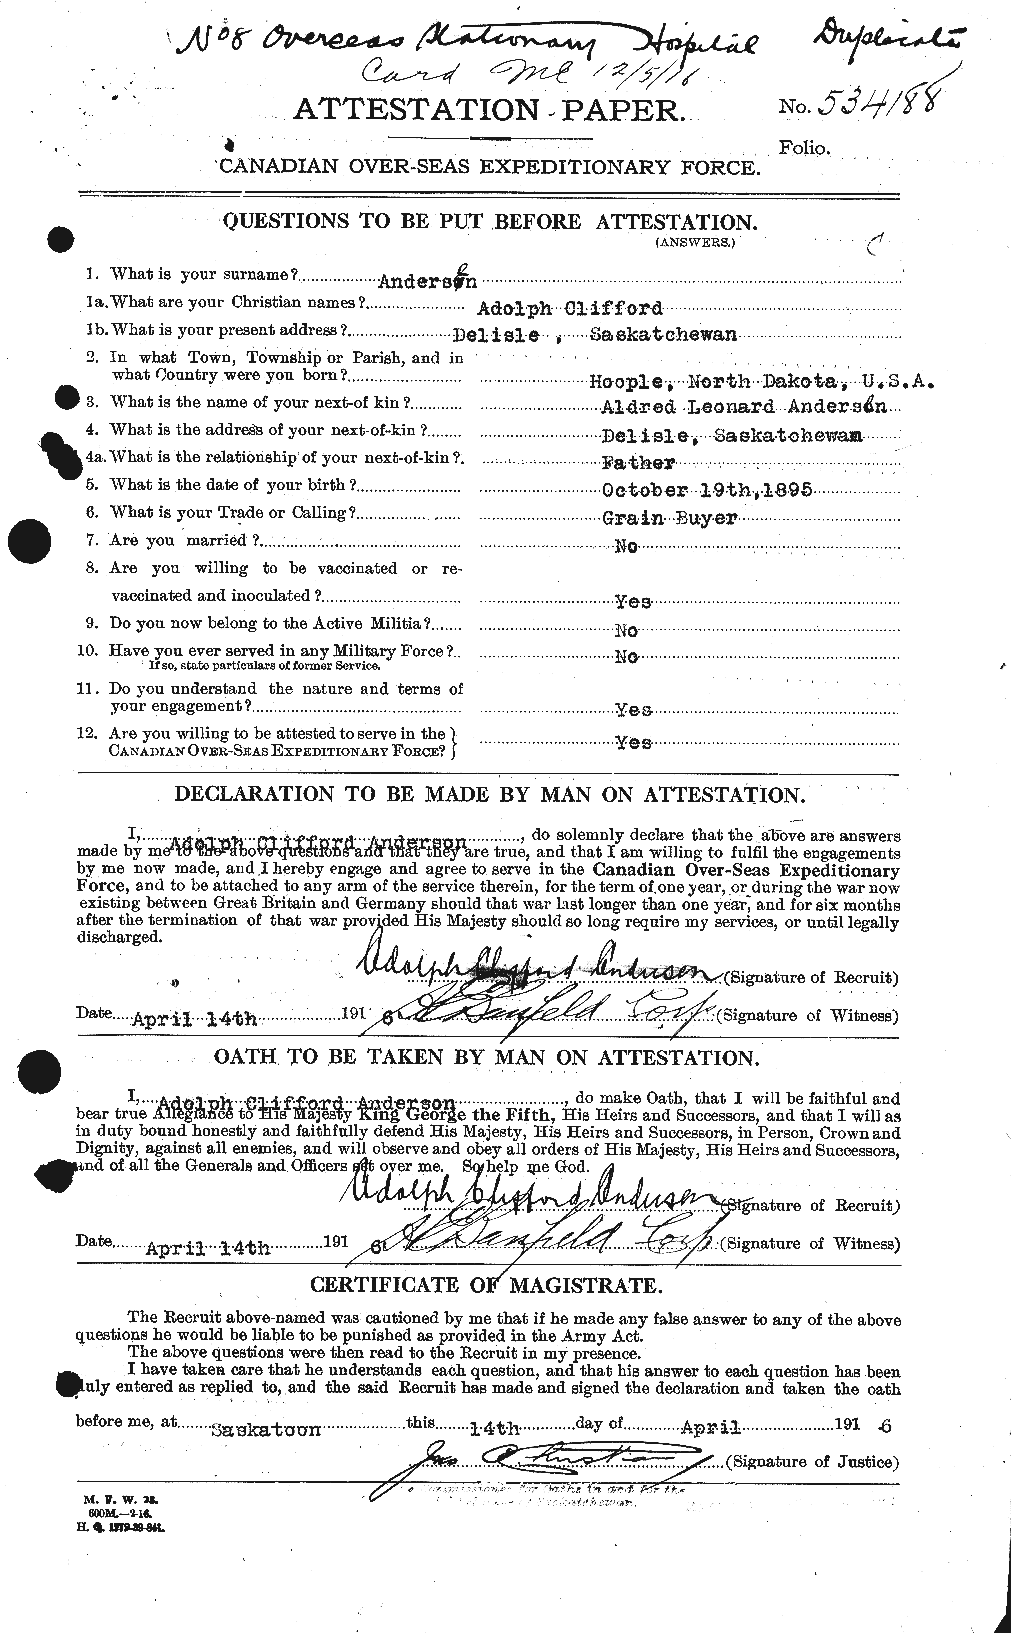 Personnel Records of the First World War - CEF 209572a